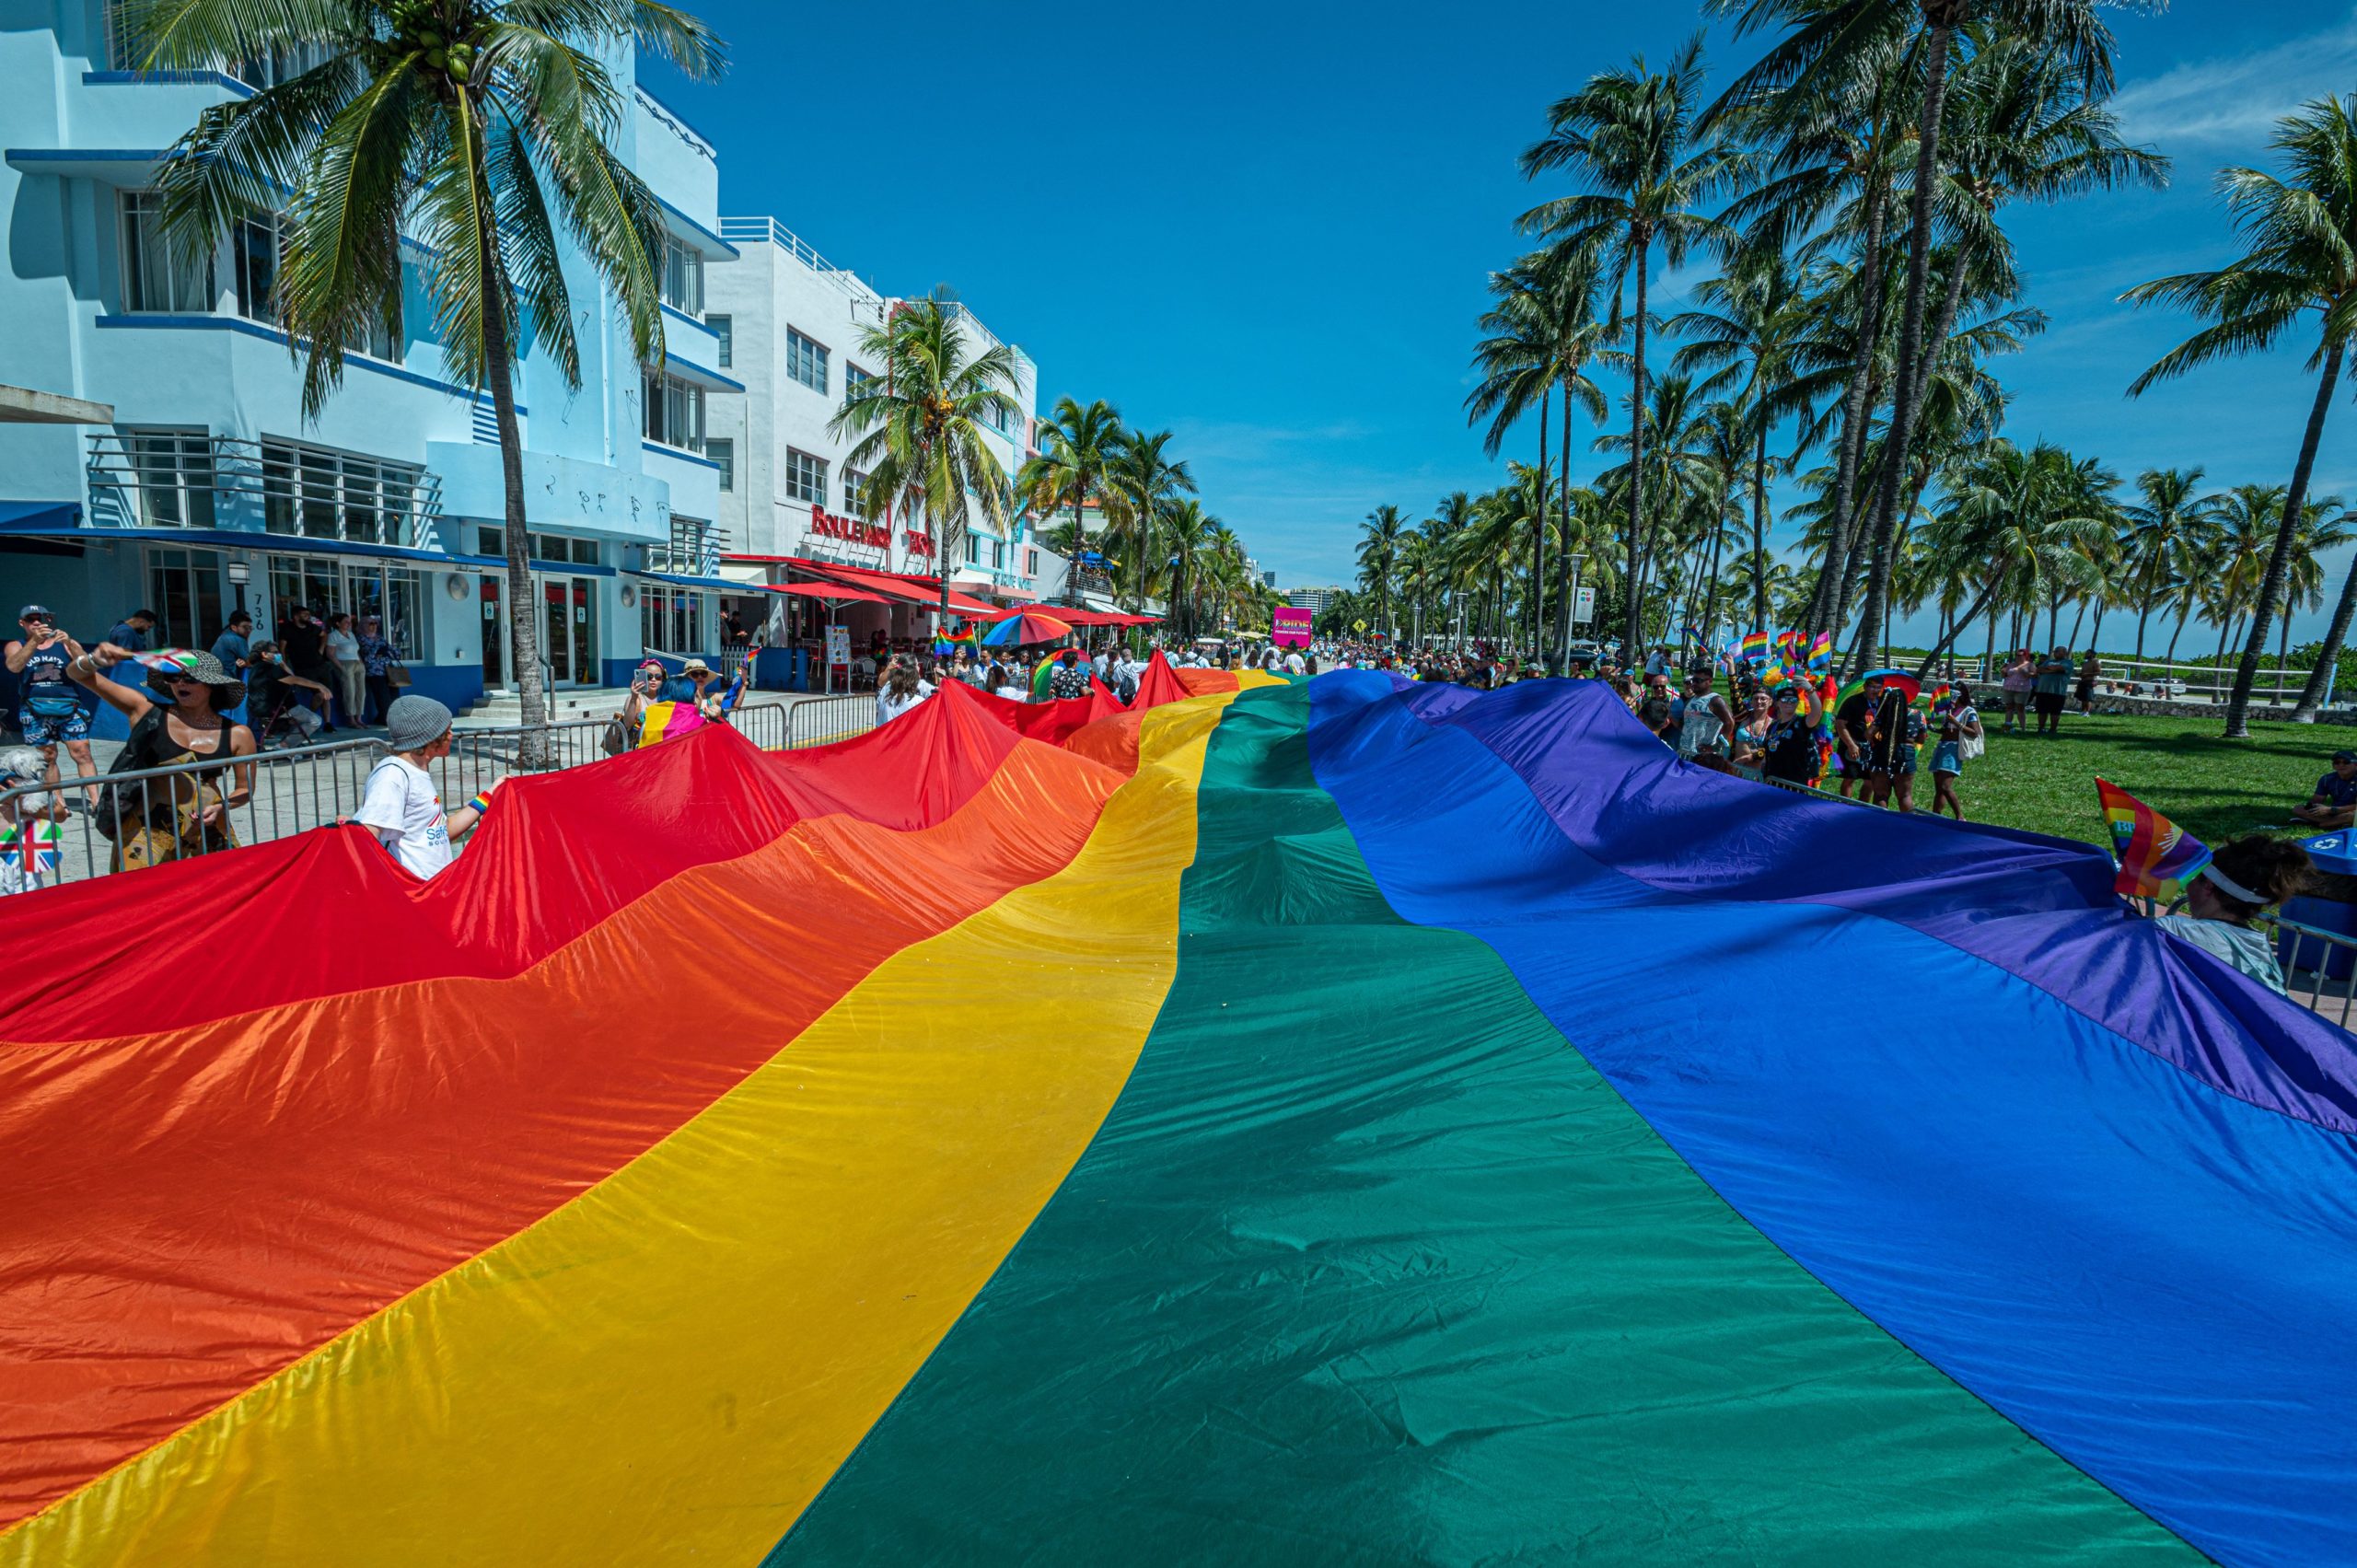 A huge multi-colored flag flies over Ocean Drive as people participate in the Pride Parade, during the Miami Beach Pride Festival, in Lummus Park, South Beach, Florida on September 19, 2021. (Photo by Giorgio Viera / AFP) (Photo by GIORGIO VIERA/AFP via Getty Images)